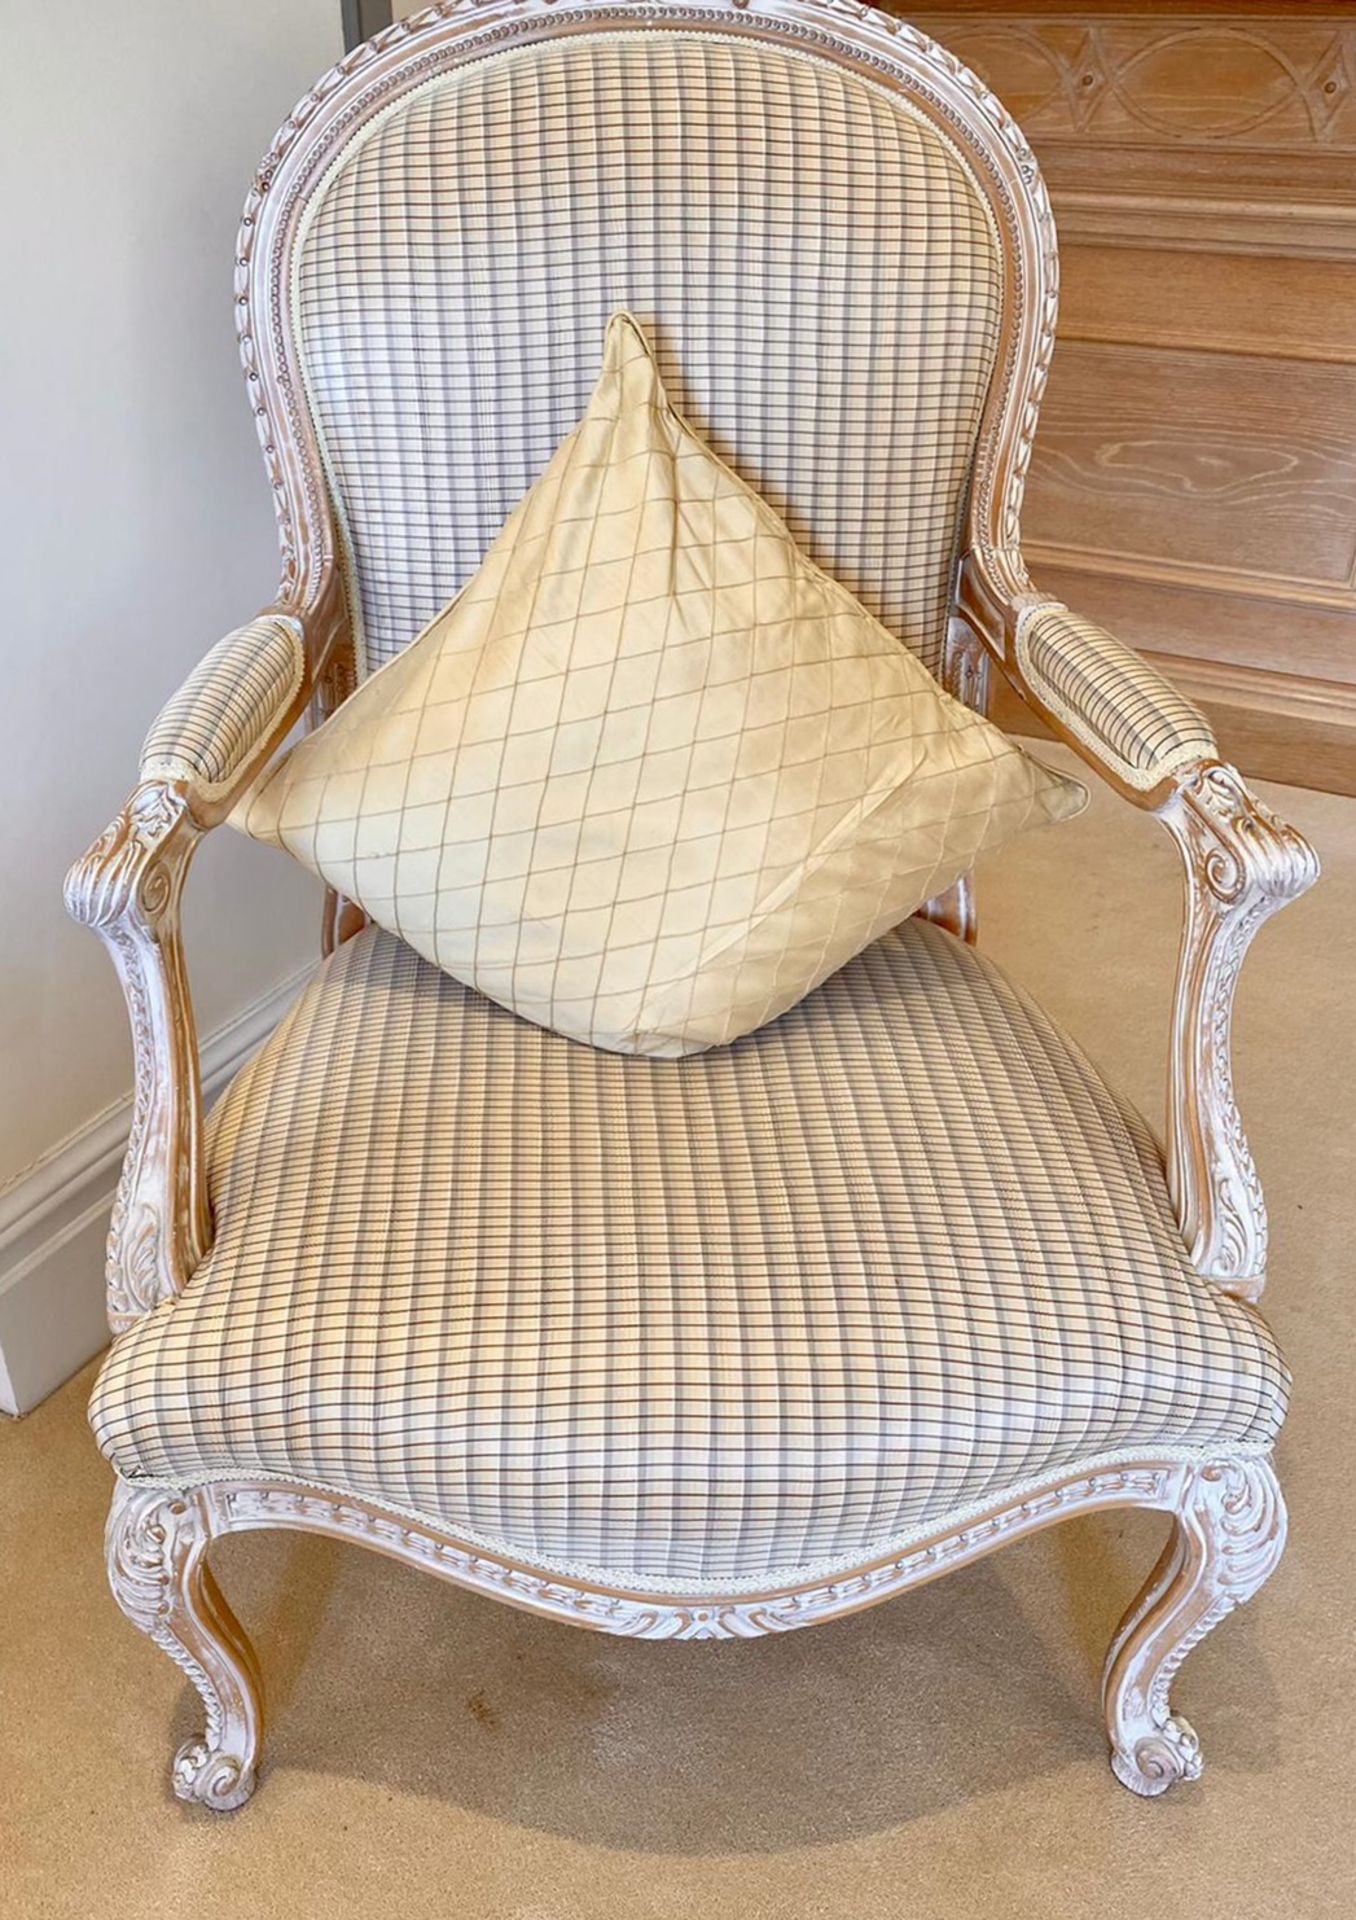 Pair of French Shabby Chic Bedroom Chairs - Stunning Carved Wood Chair Upholstered With Striped - Image 9 of 16